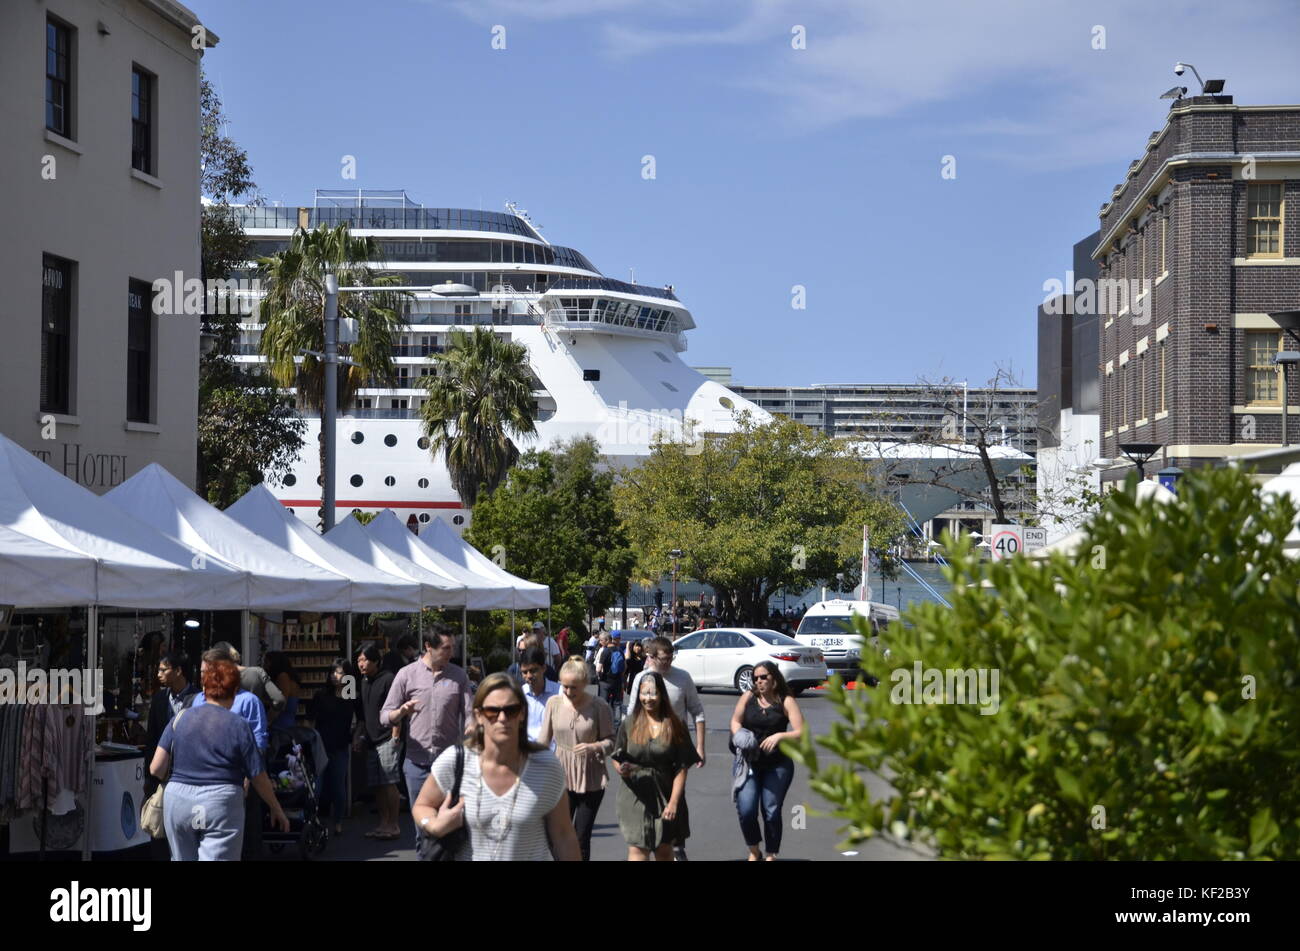 A street market in Argyle Street, Sydney with cruise liner Carnival Spirit in the background moored at Cicular Quay. Stock Photo